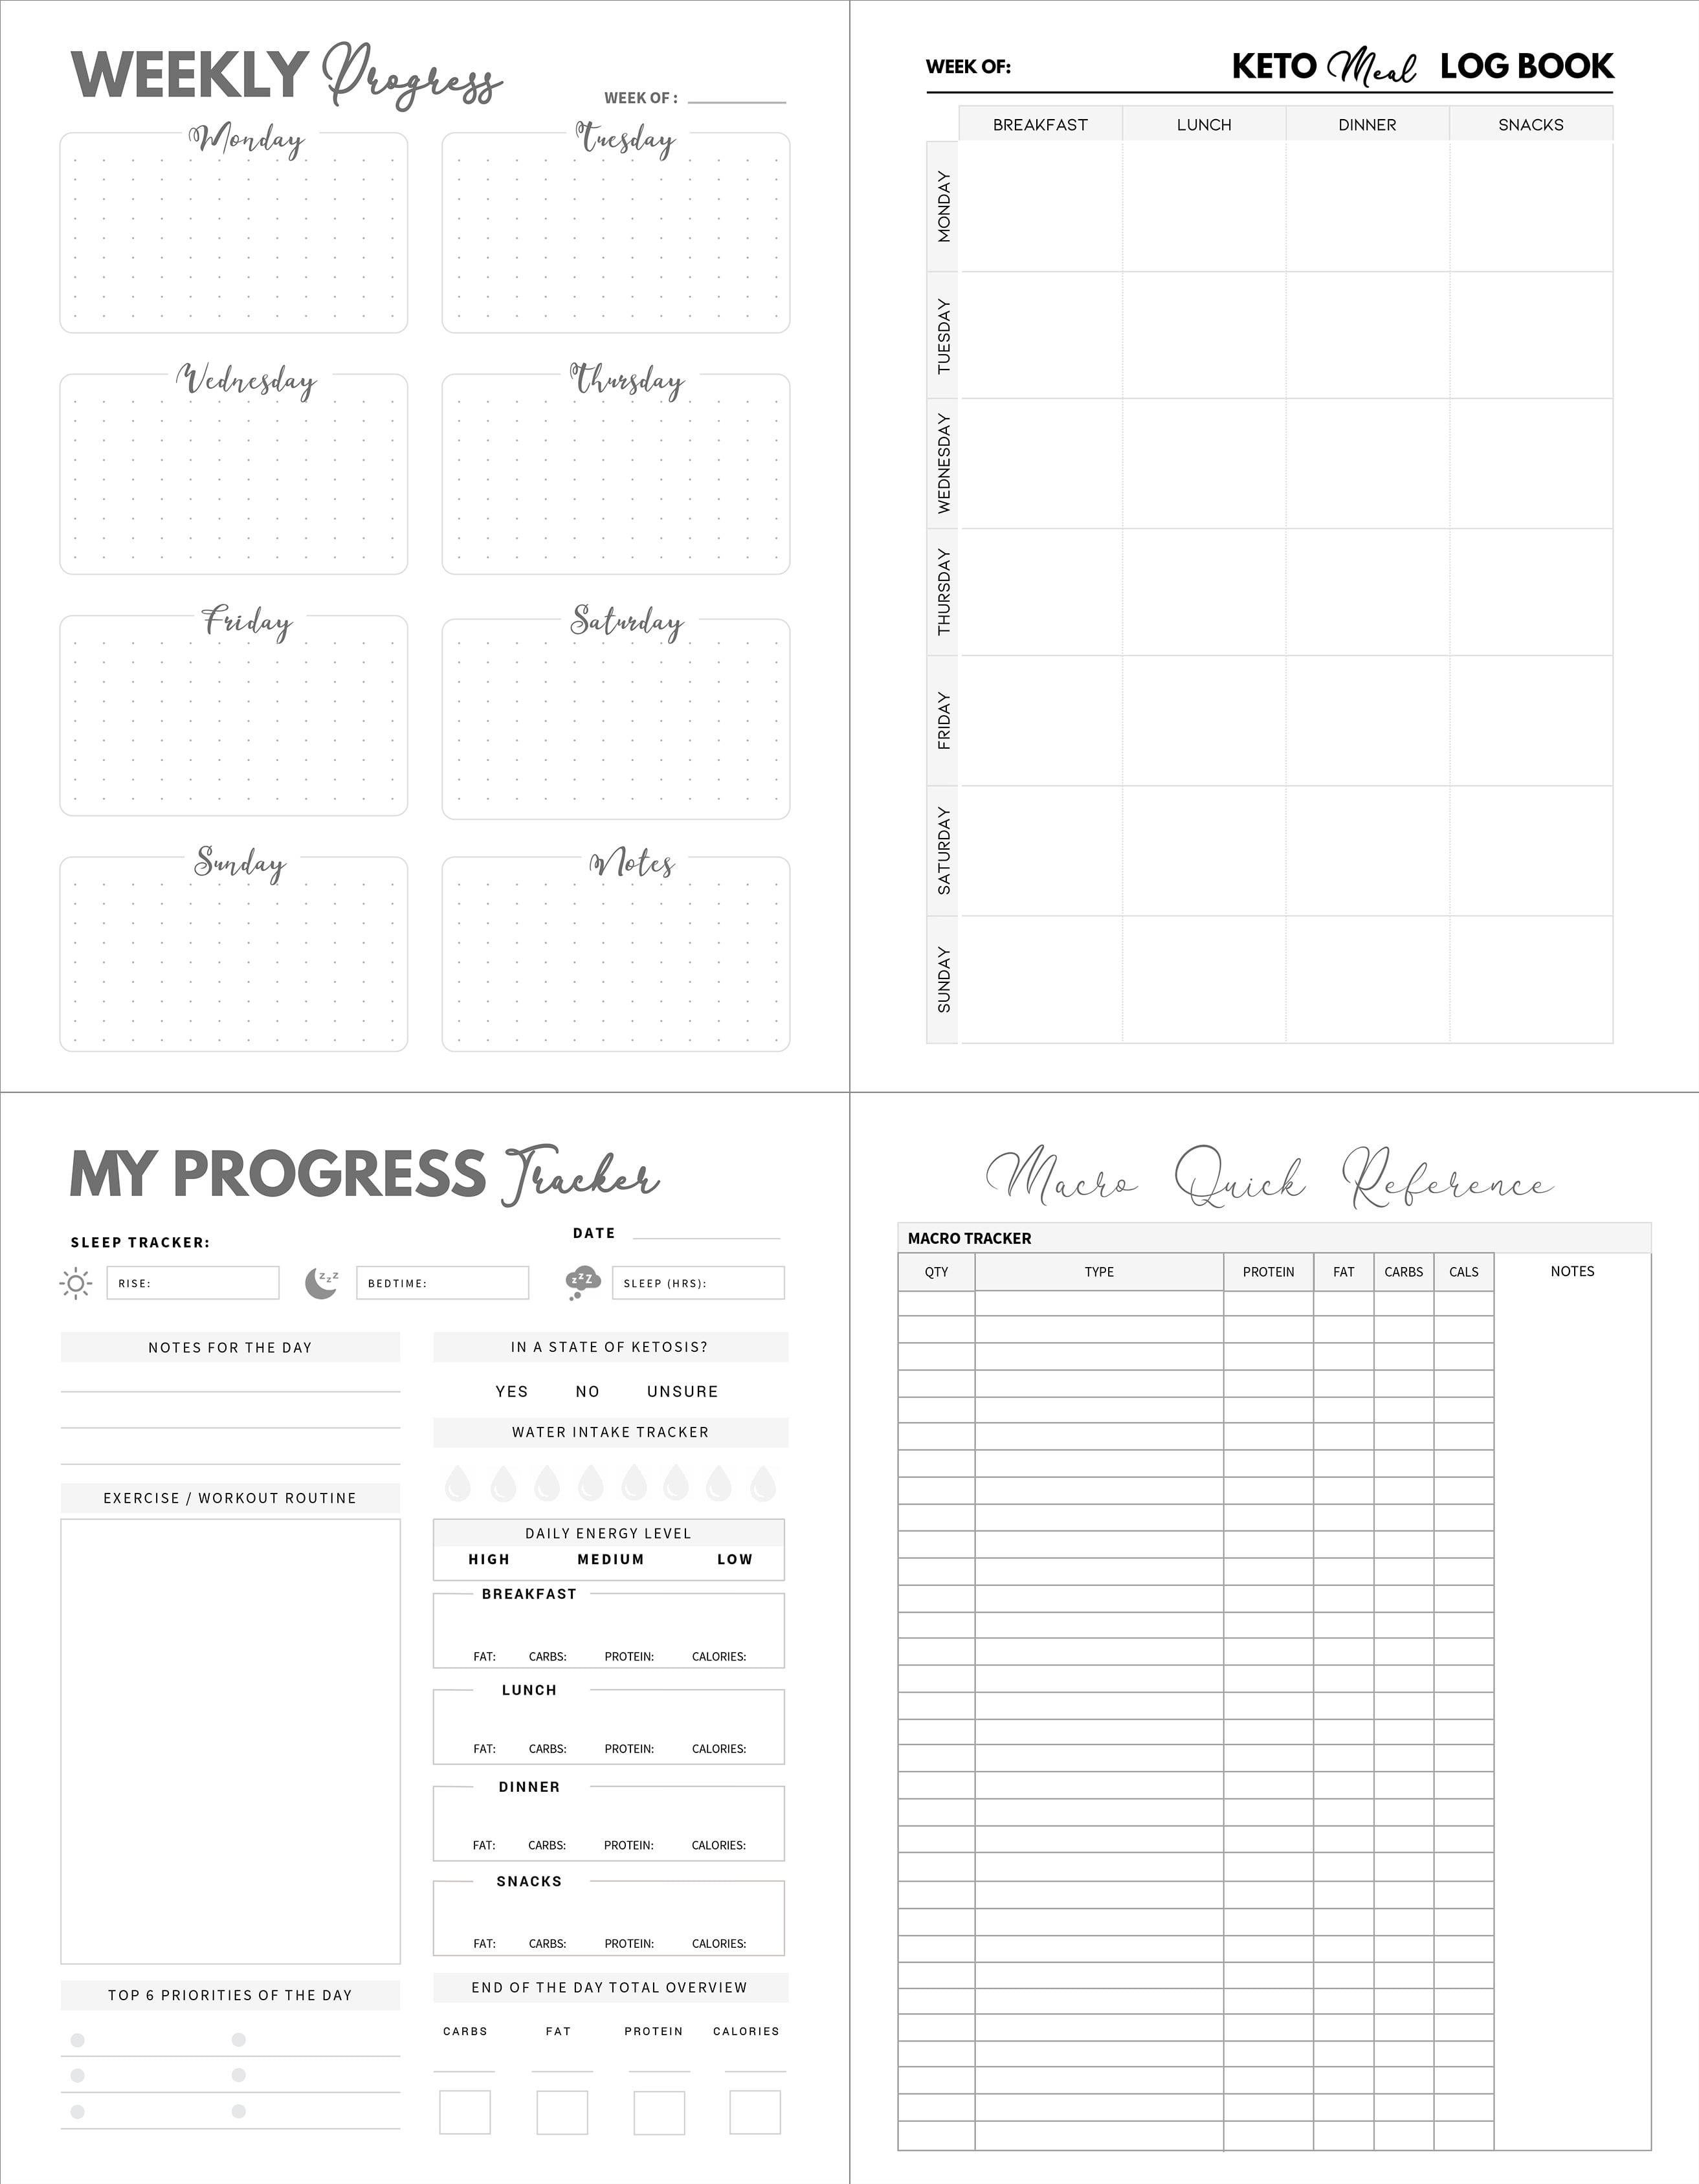 Picture of Document, Text, Plot, Page with text WEEKLY Progress WEEK OF: KETO Meal LOG BOOK WEEK OF ...